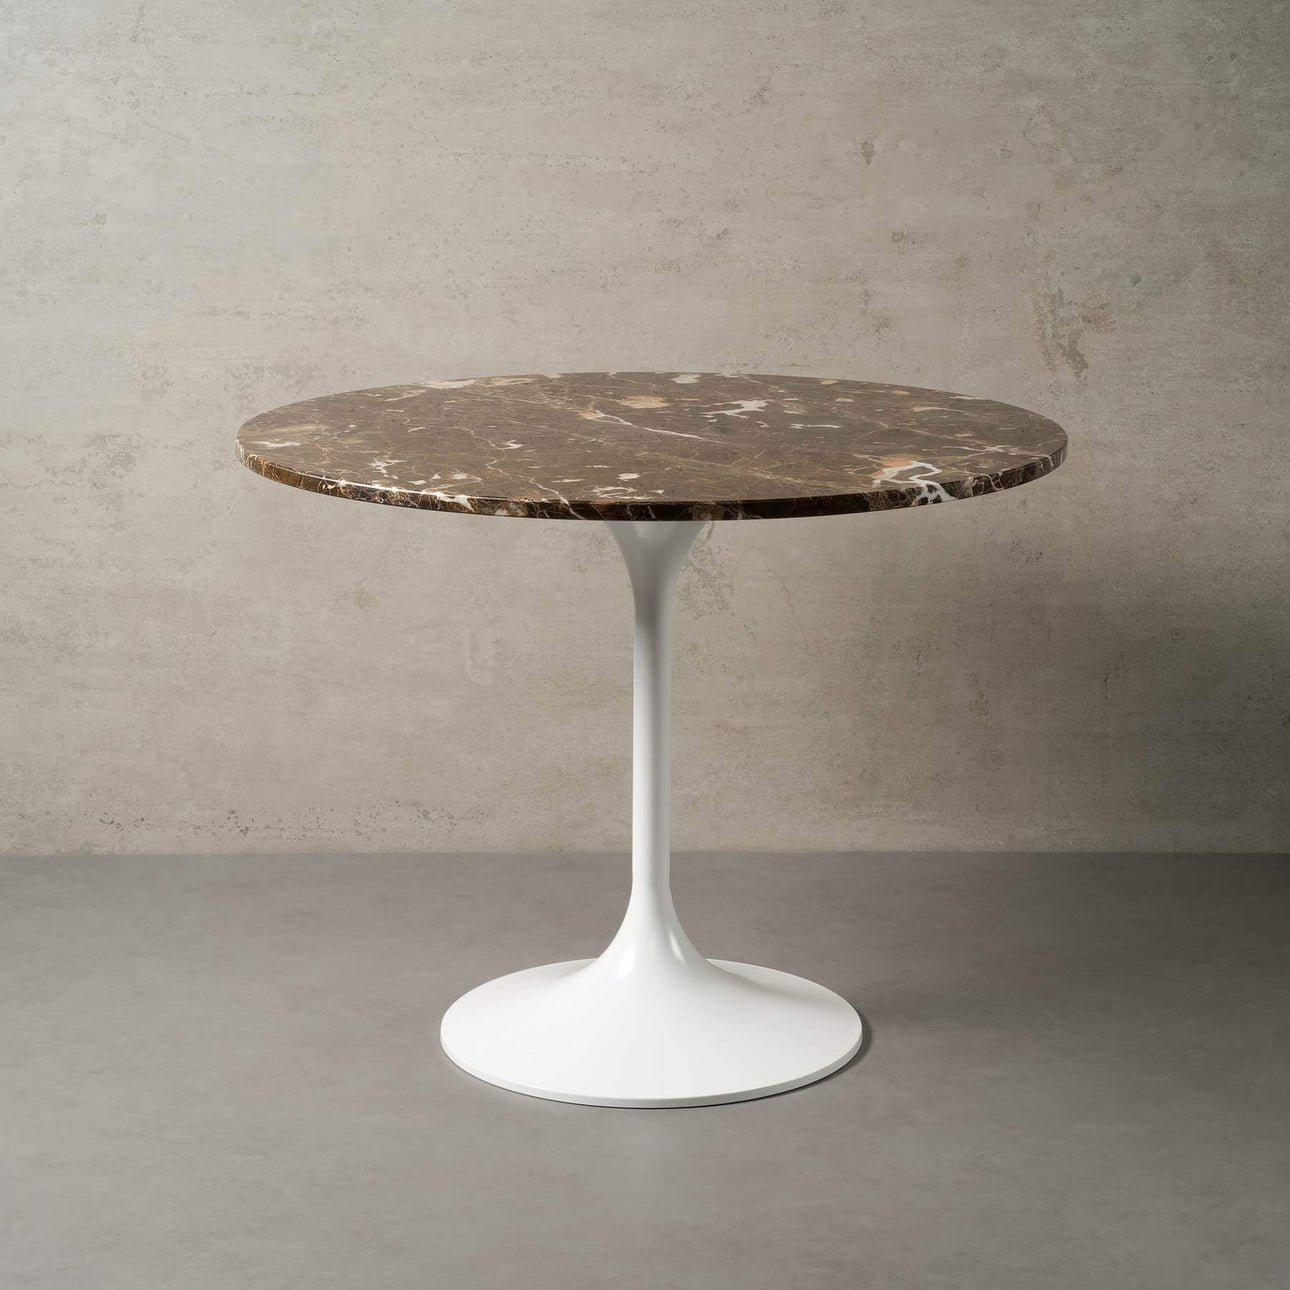 Tokyo marble dining table